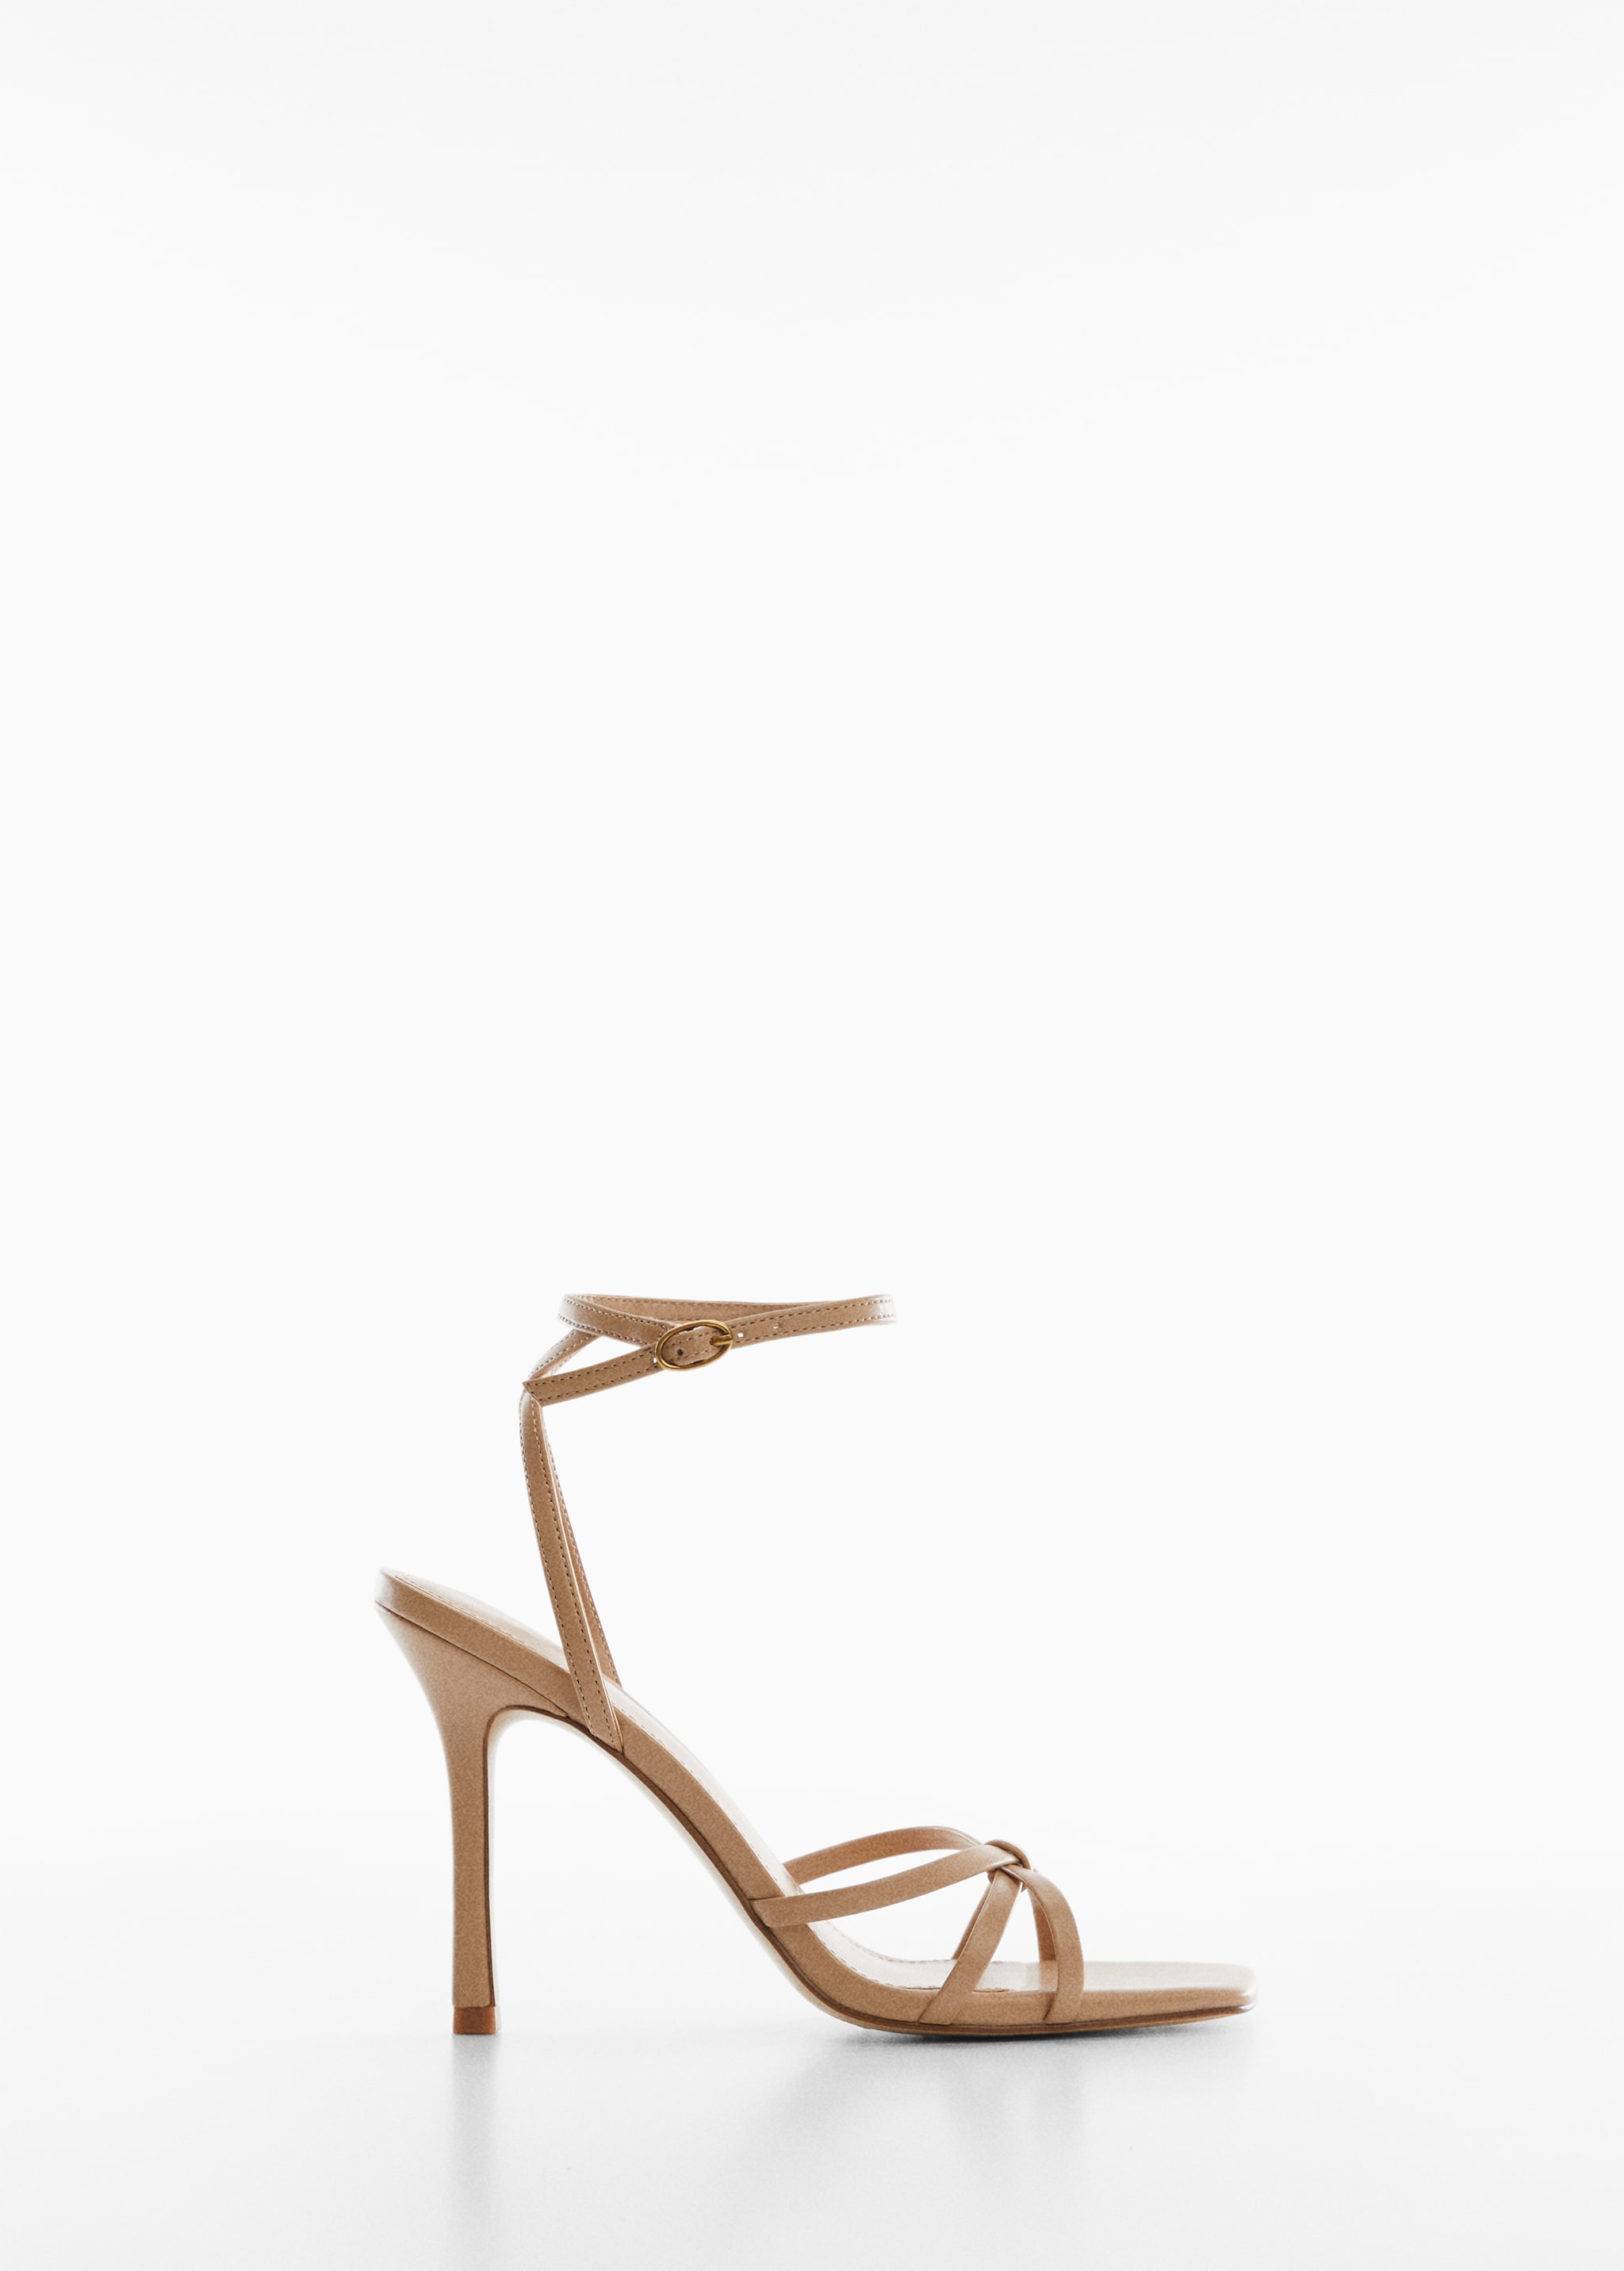 Strappy heeled sandals - Article without model